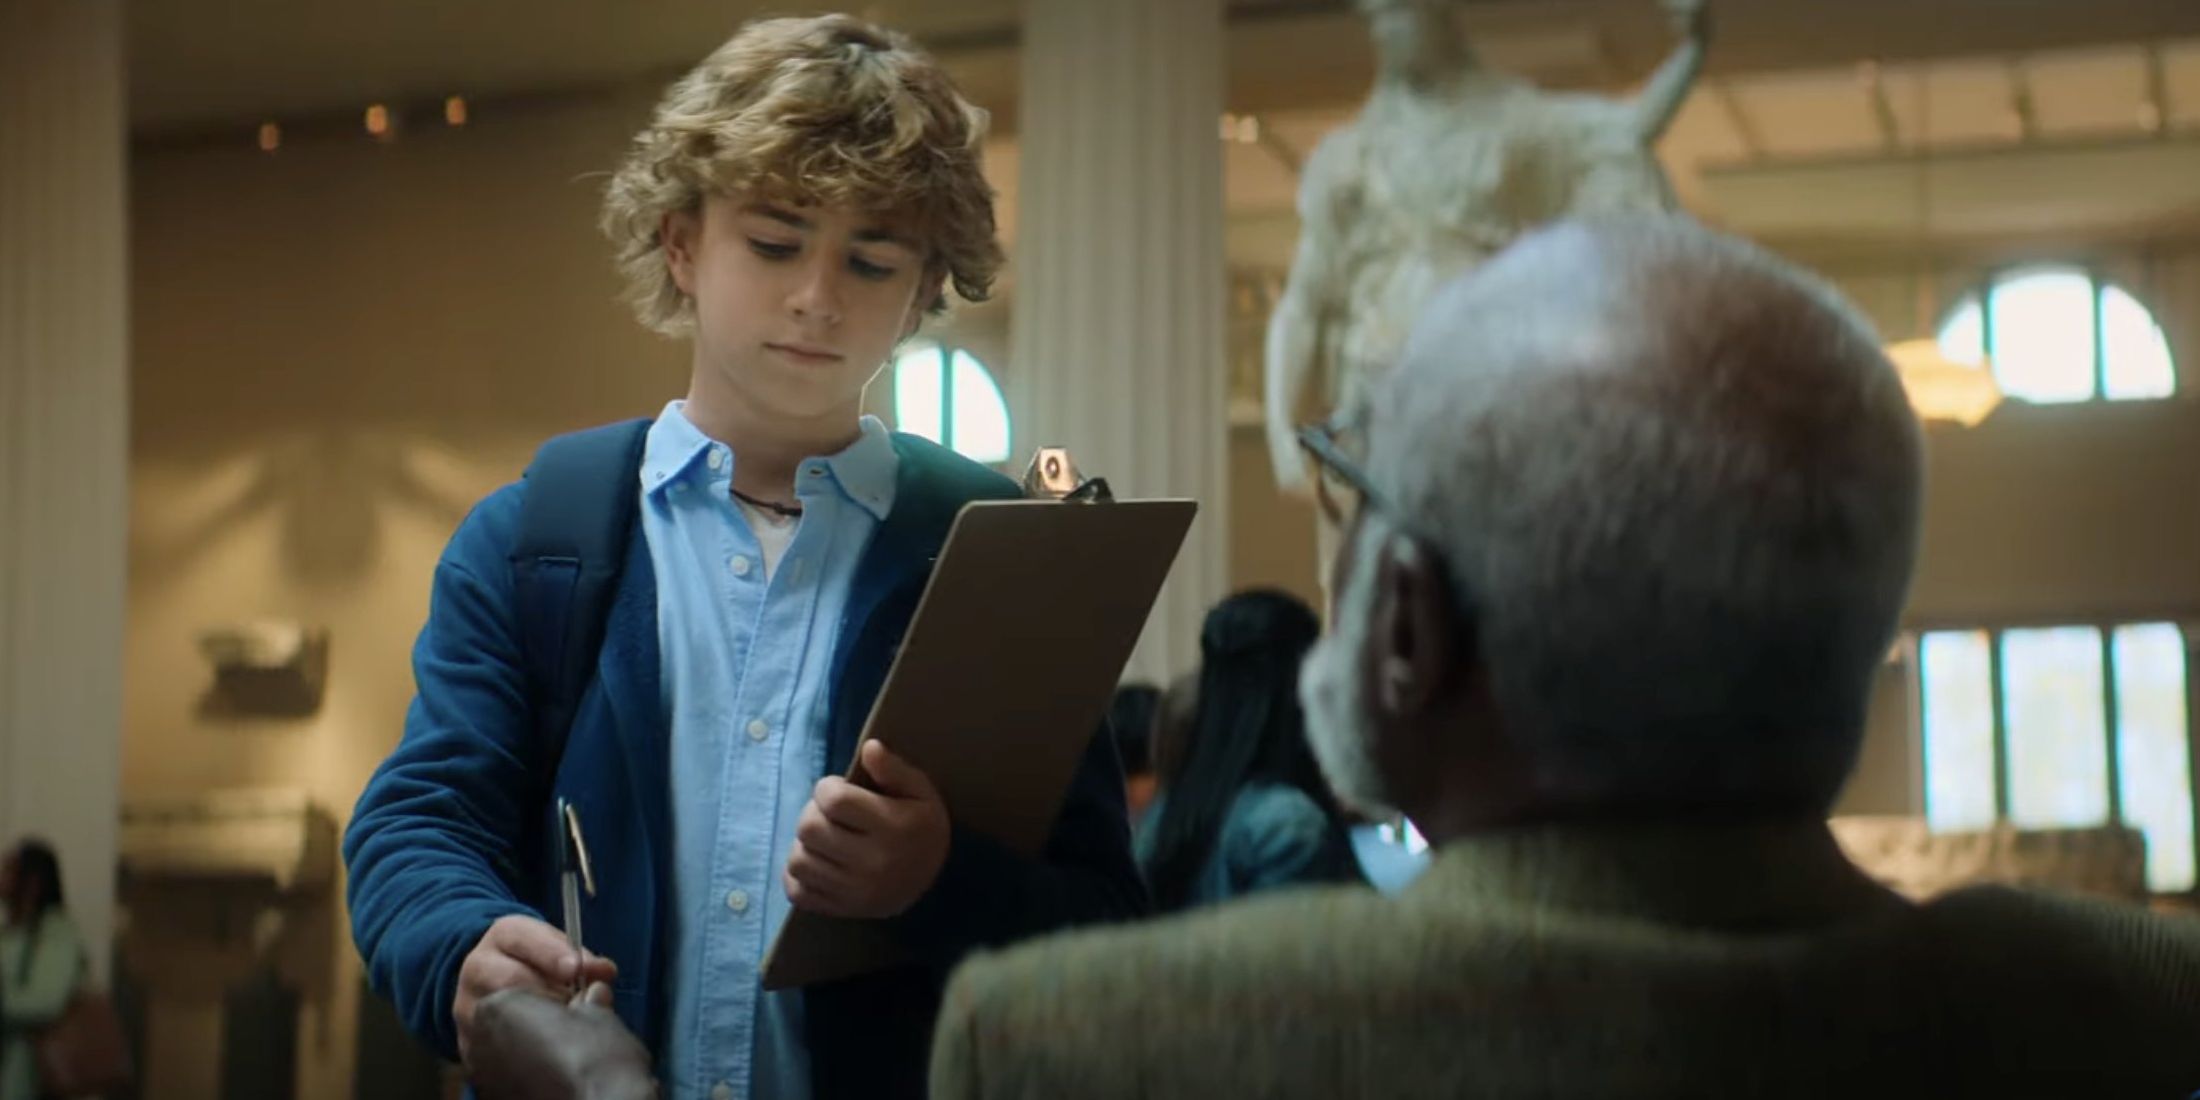 In 'Percy Jackson and the Olympians' Percy (Walker Scobell) is getting a pen from Chiron (Glynn Turman).